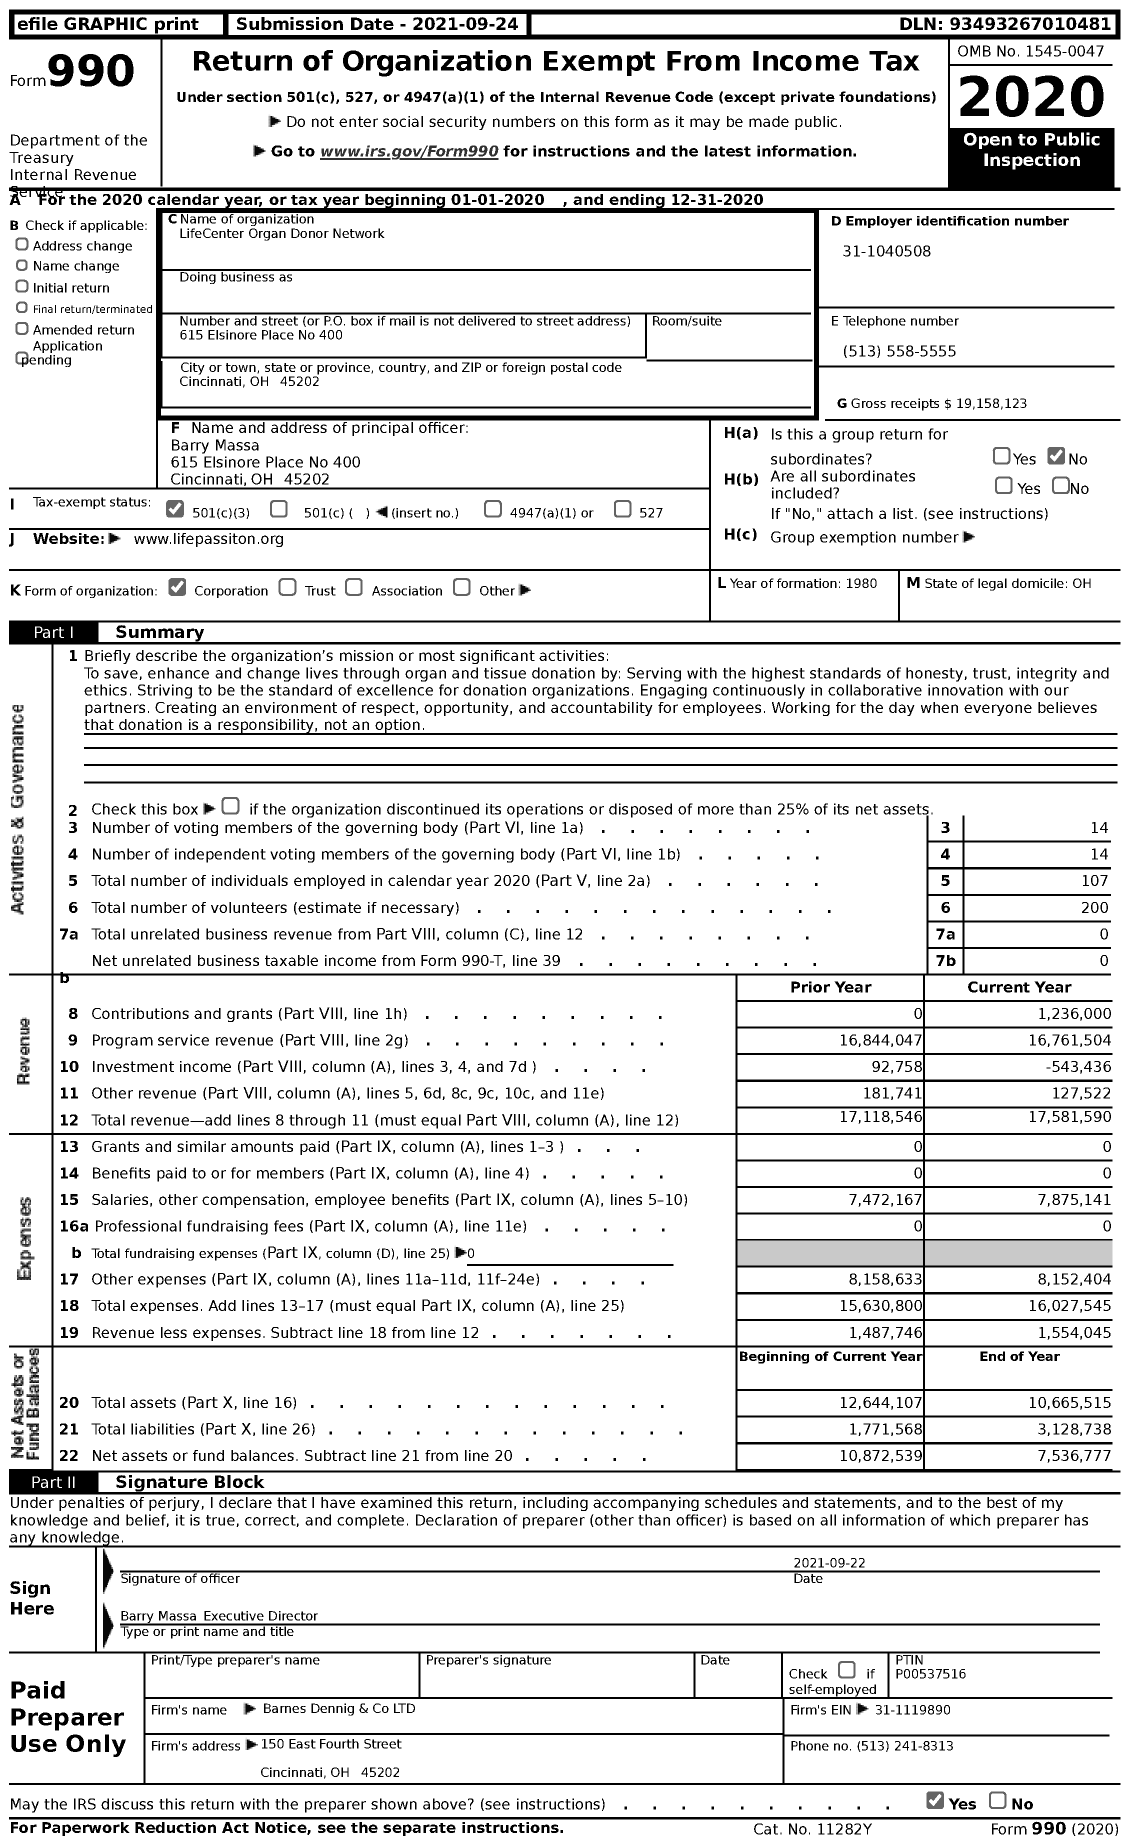 Image of first page of 2020 Form 990 for LifeCenter Organ Donor Network